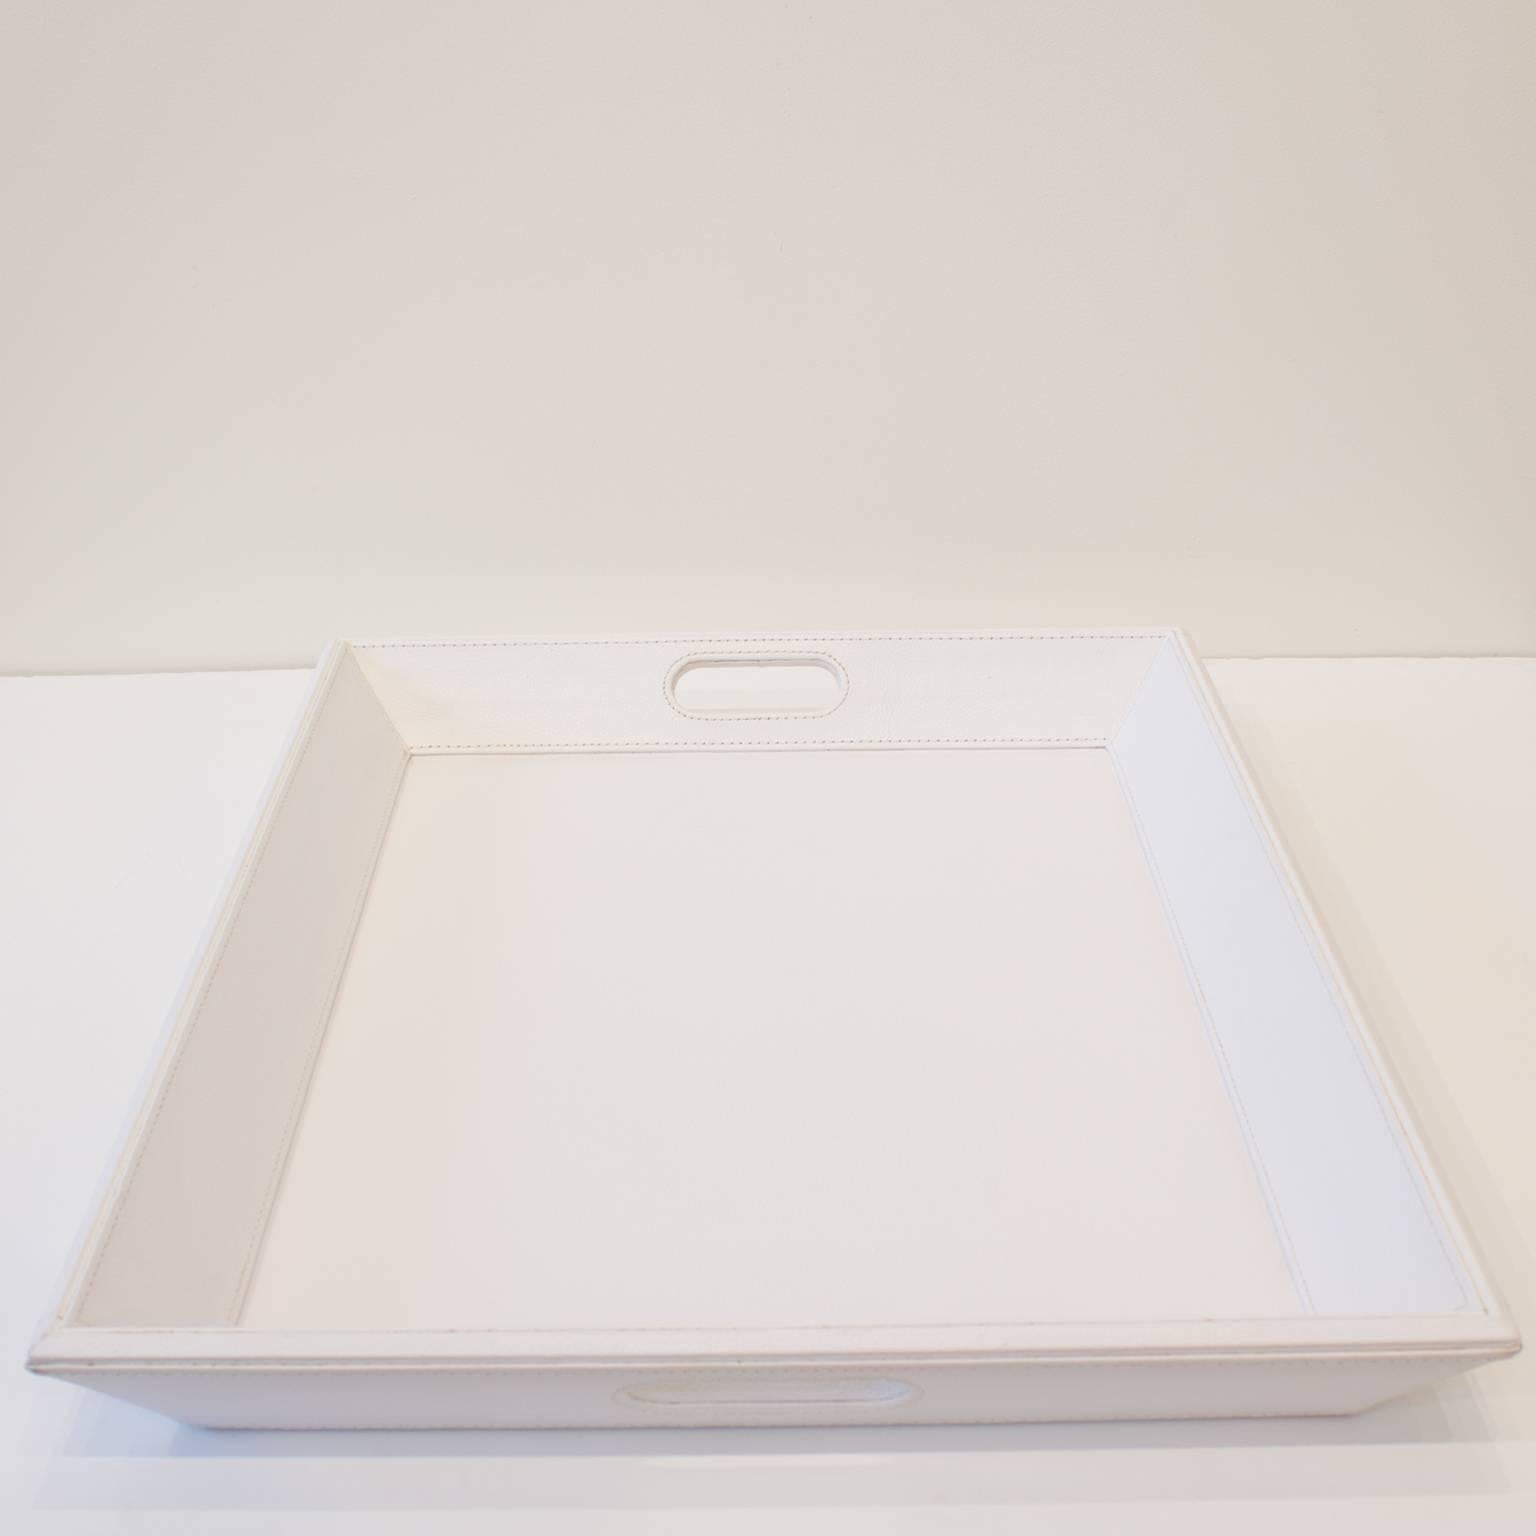 Exceptional Hand-Stitched White Leather Tray In Excellent Condition For Sale In New York, NY